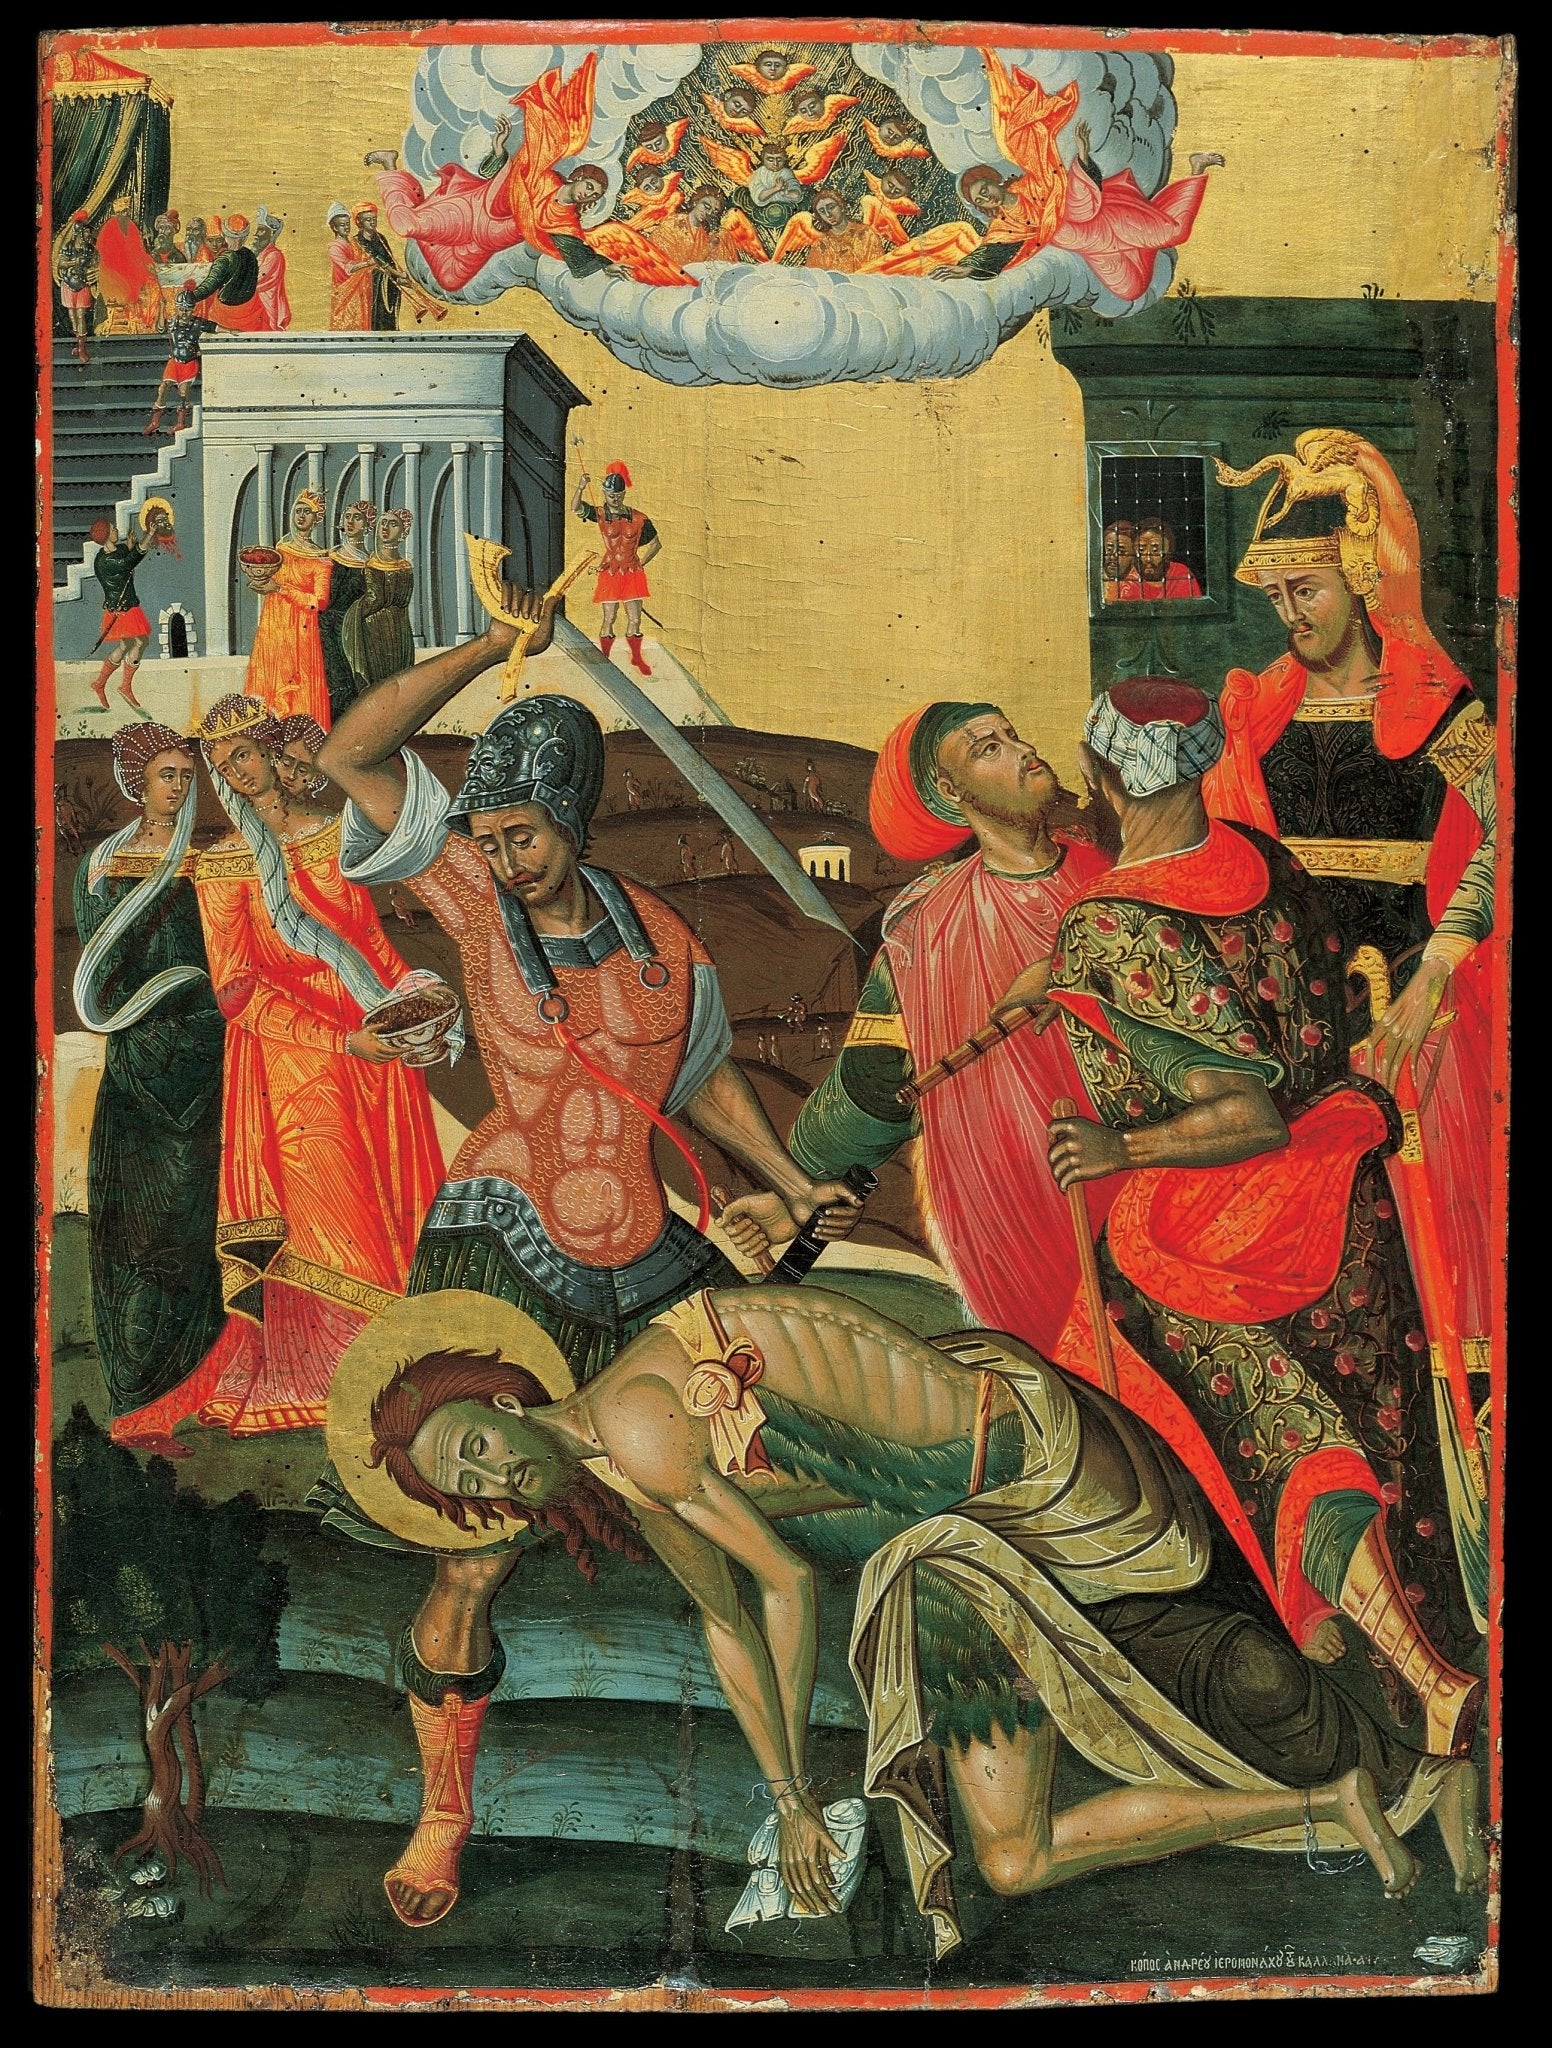 Menpleasing and Murder: A Homily for the Beheading of the Forerunner (2019)